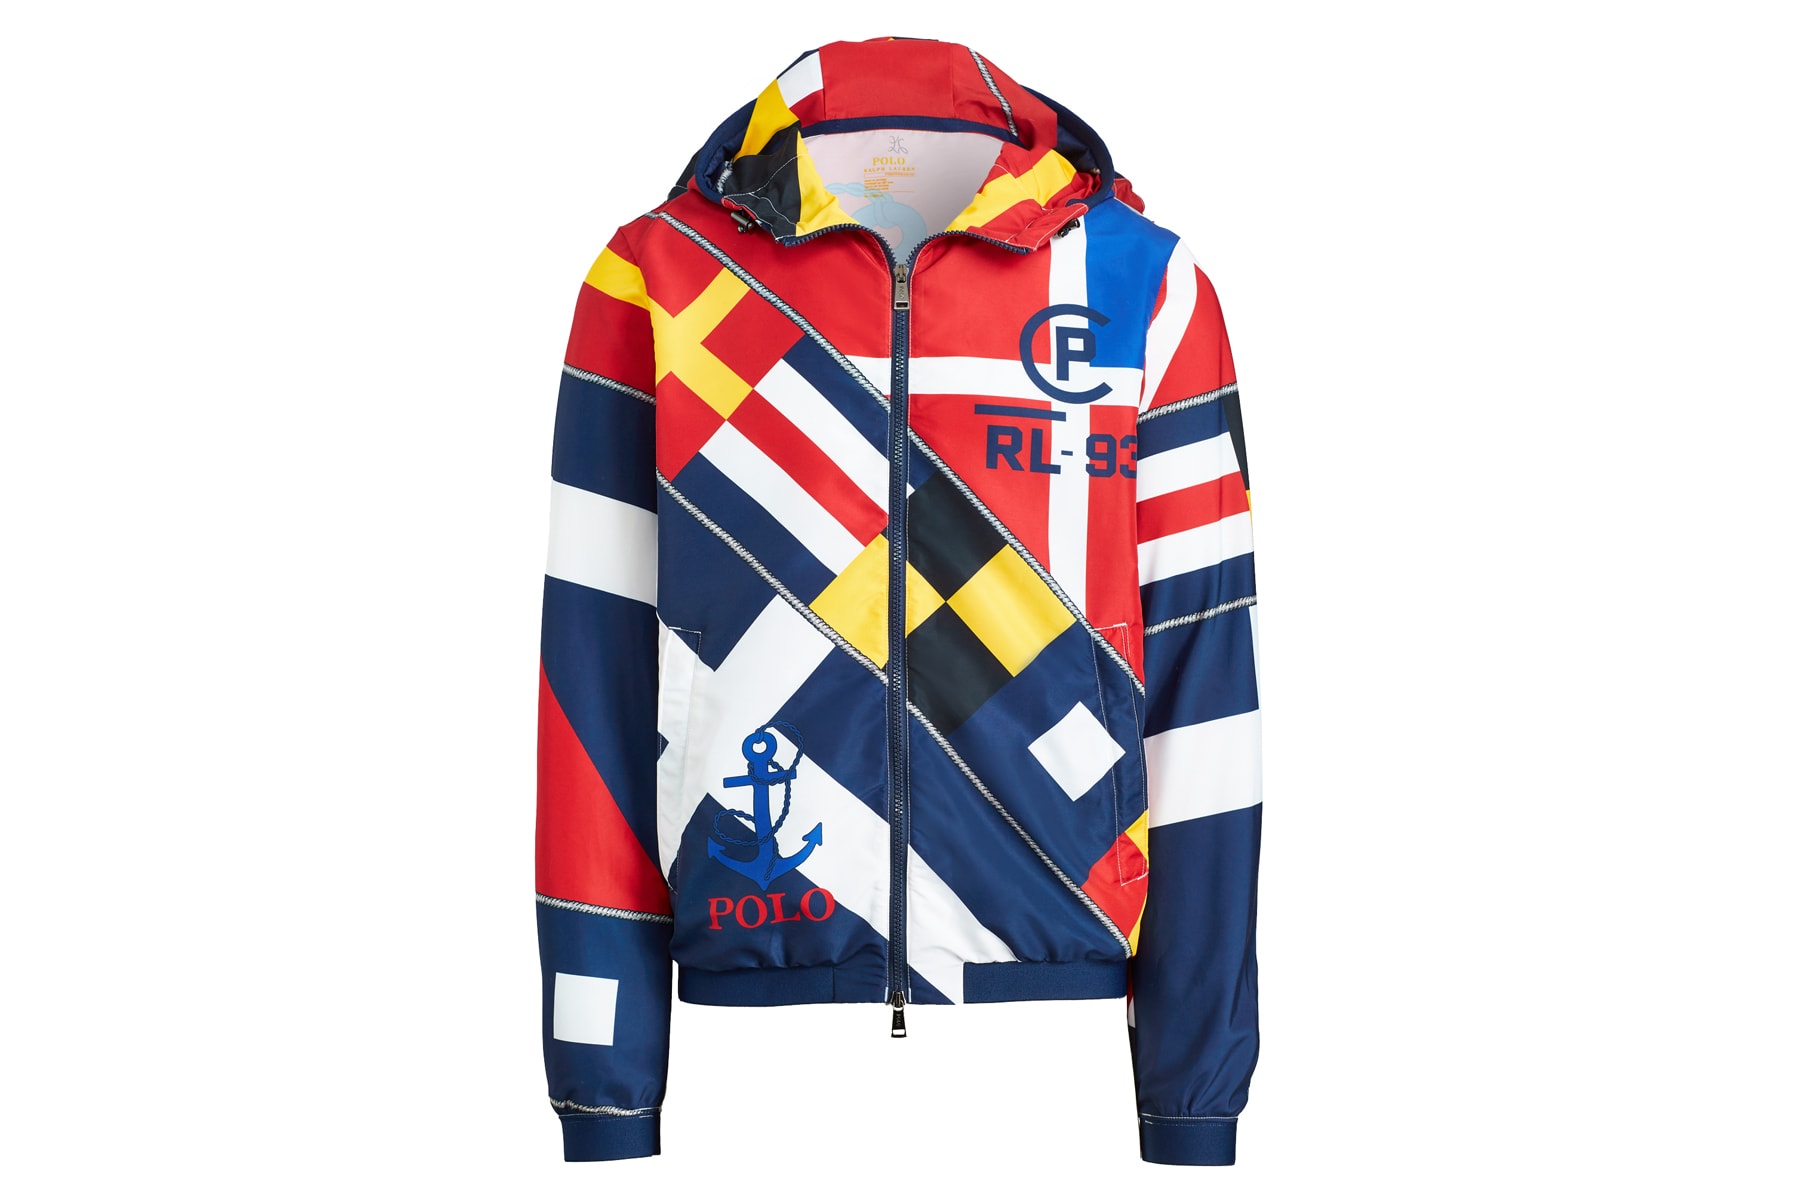 Polo by Ralph Lauren CP-93 Collection 2018 limited edition America’s Cup sailing nautical reissues